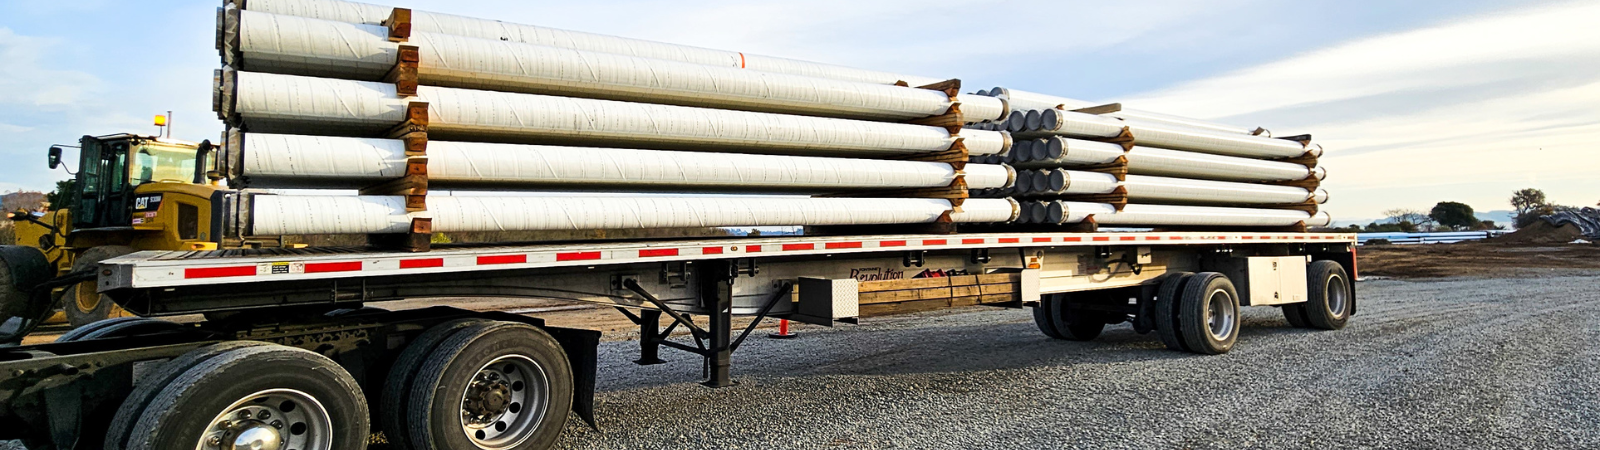 White pipes are stacked on a semi-tractor trailer in a gravel lot.